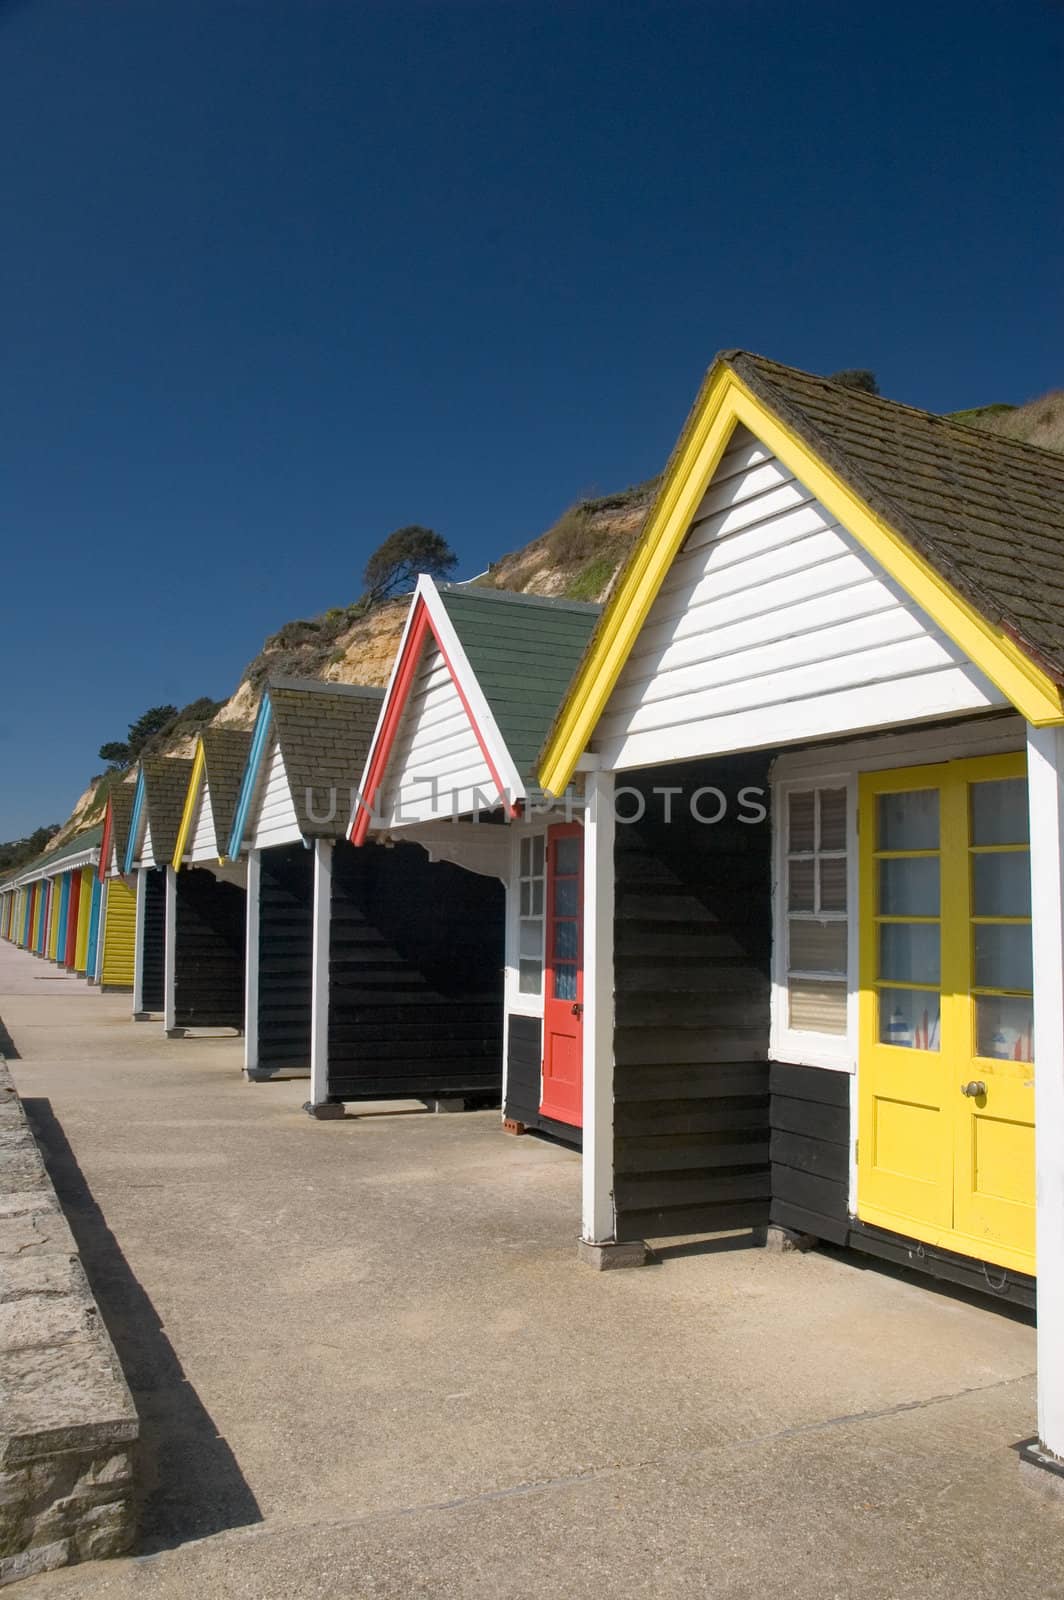 A row of colourfull beach huts on a clear sunny day